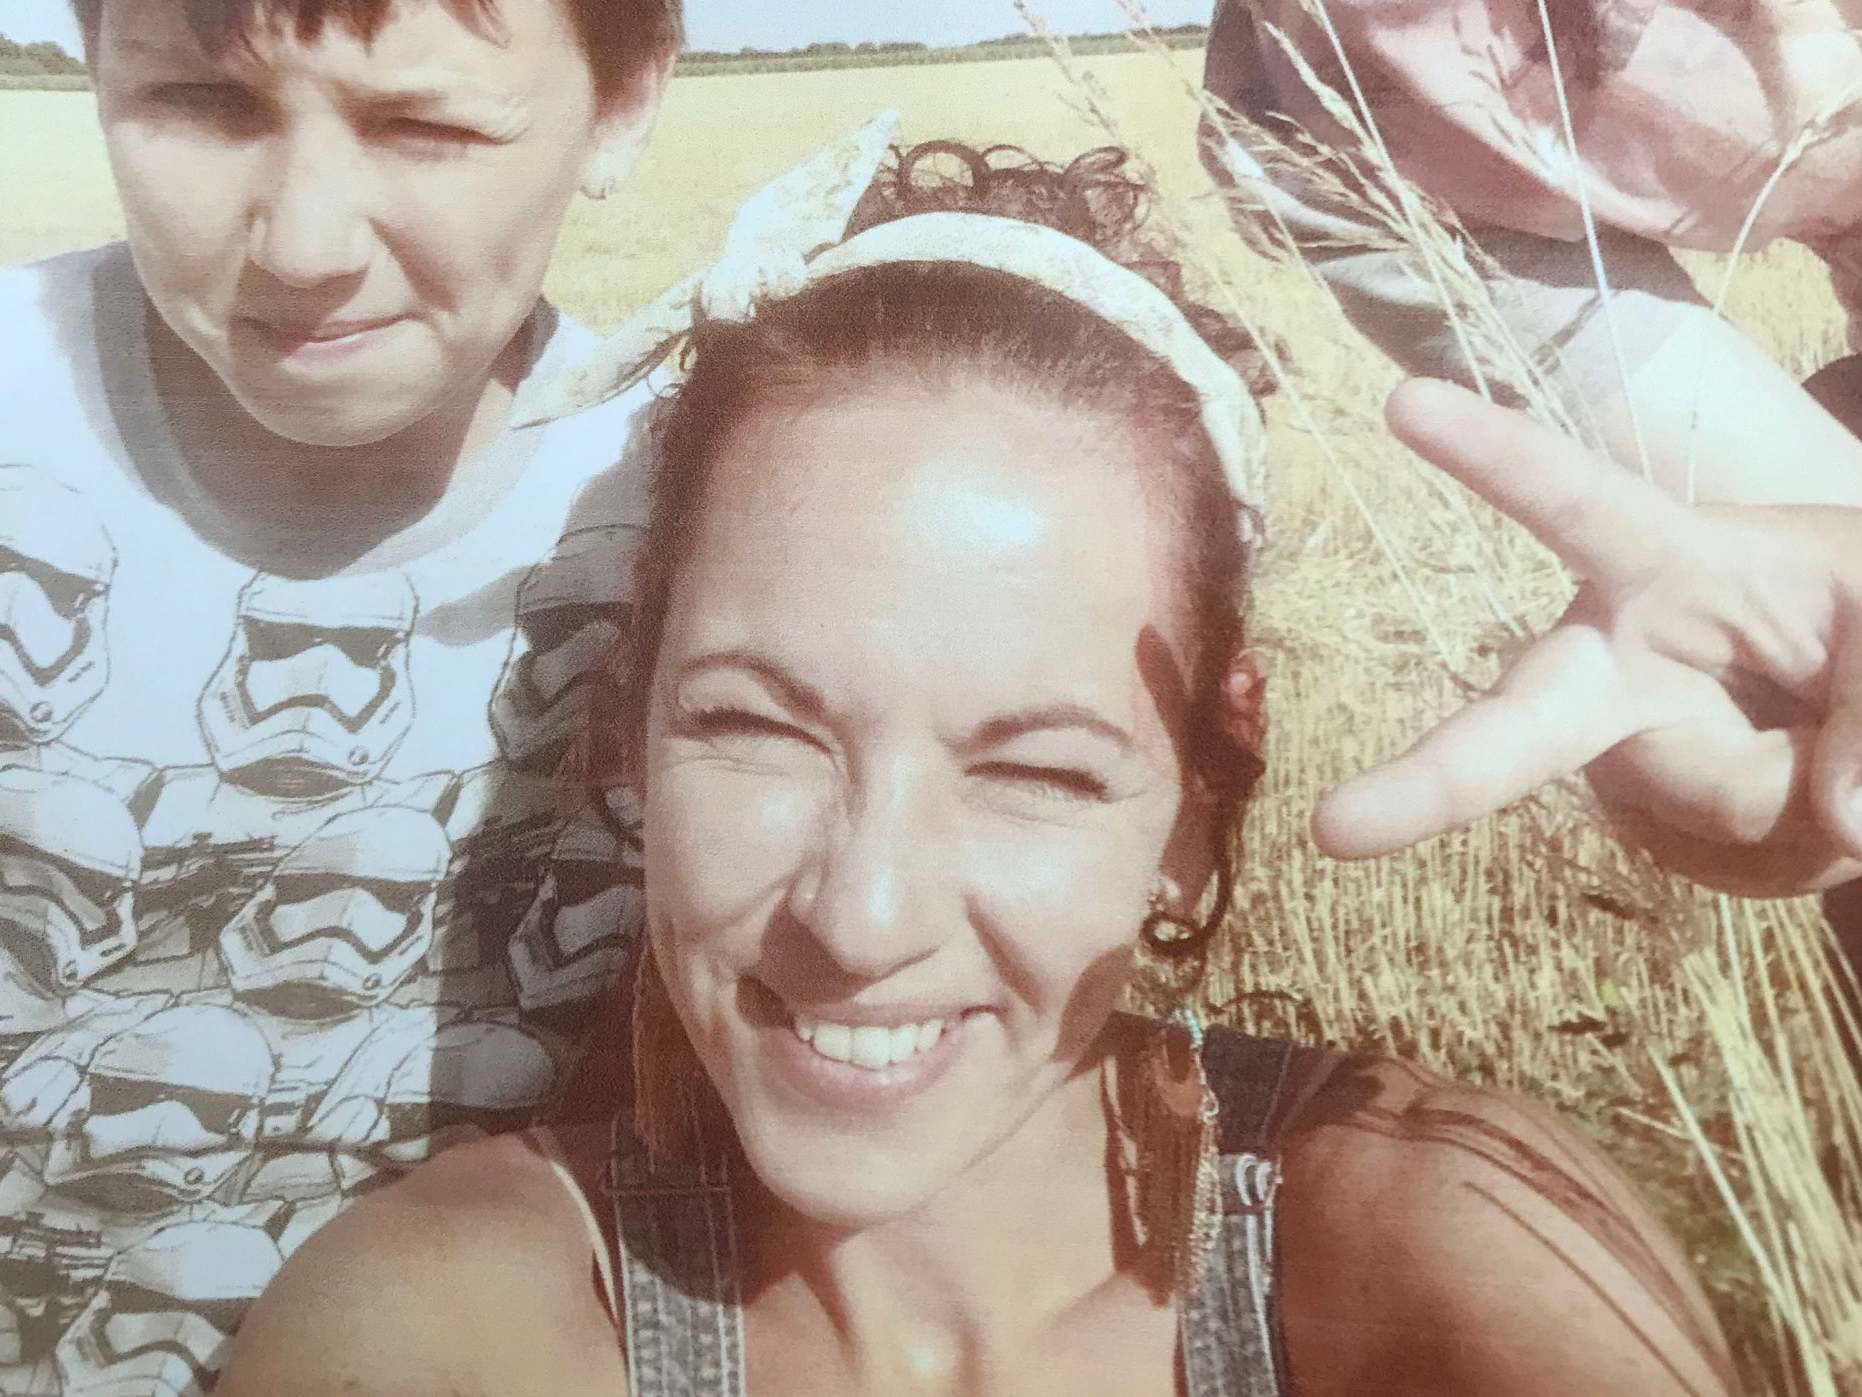 Danielle Chilvers found herself in danger after she tried to help her 14-year-old son and his friend at the beach at Waxham